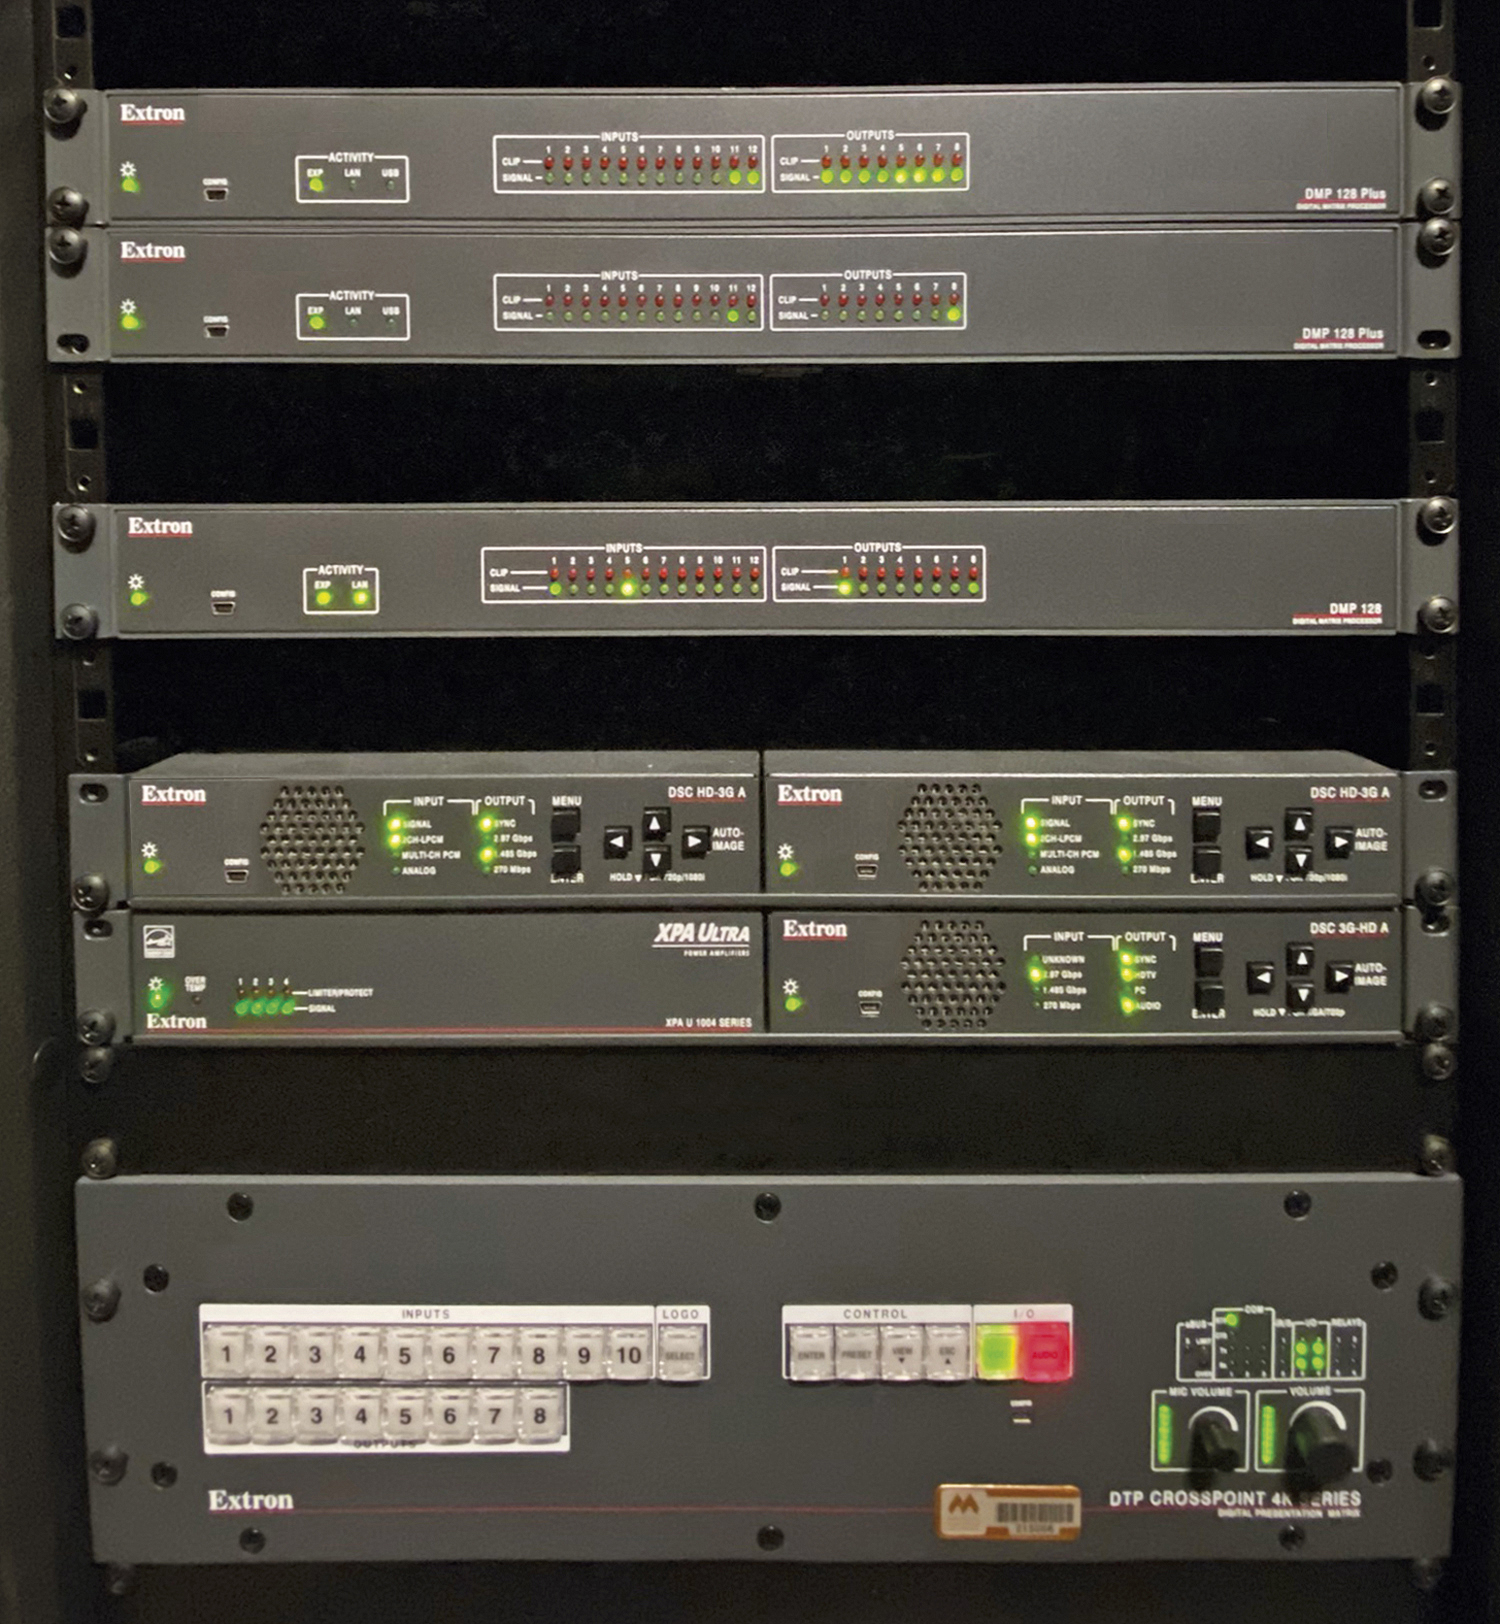 To support televised broadcasts, Extron DSC HD-3G A and DSC 3G-HD A scalers convert signal formats between HDMI and 3G-SDI. These scalers also handle audio embedding and de-embedding - interior